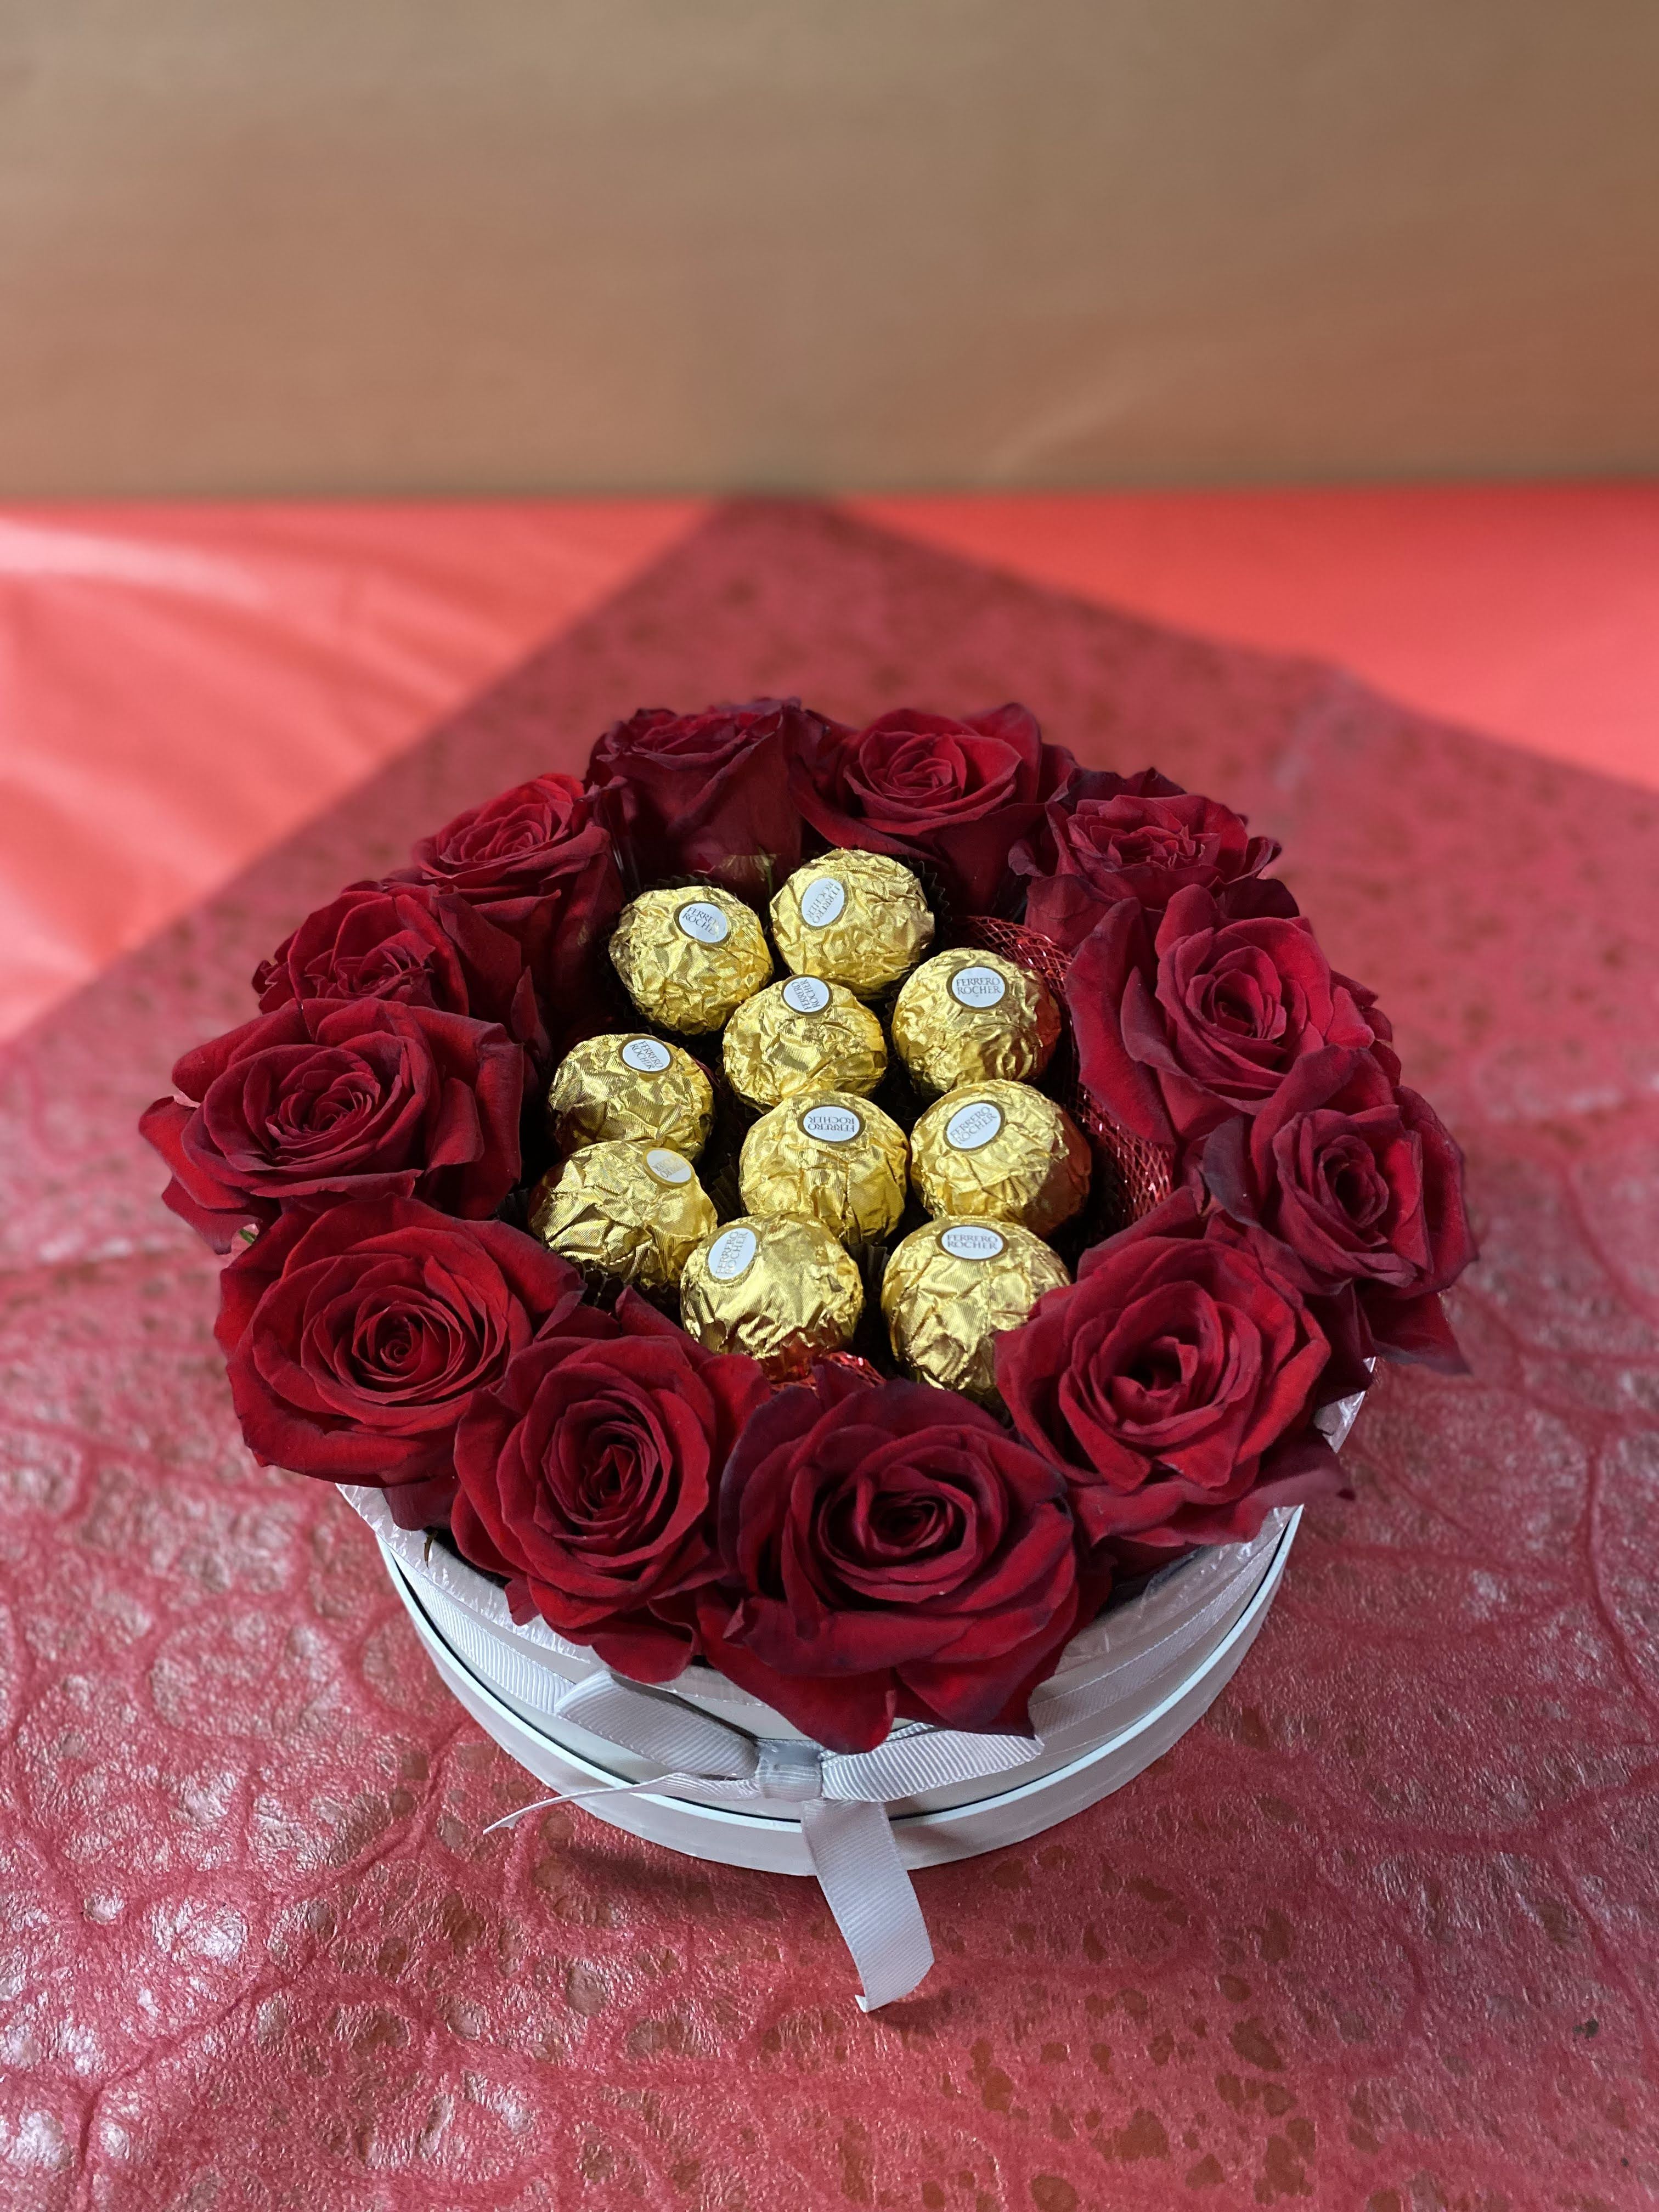 Roses and Chocolate - A custom box with red roses and premium chocolate